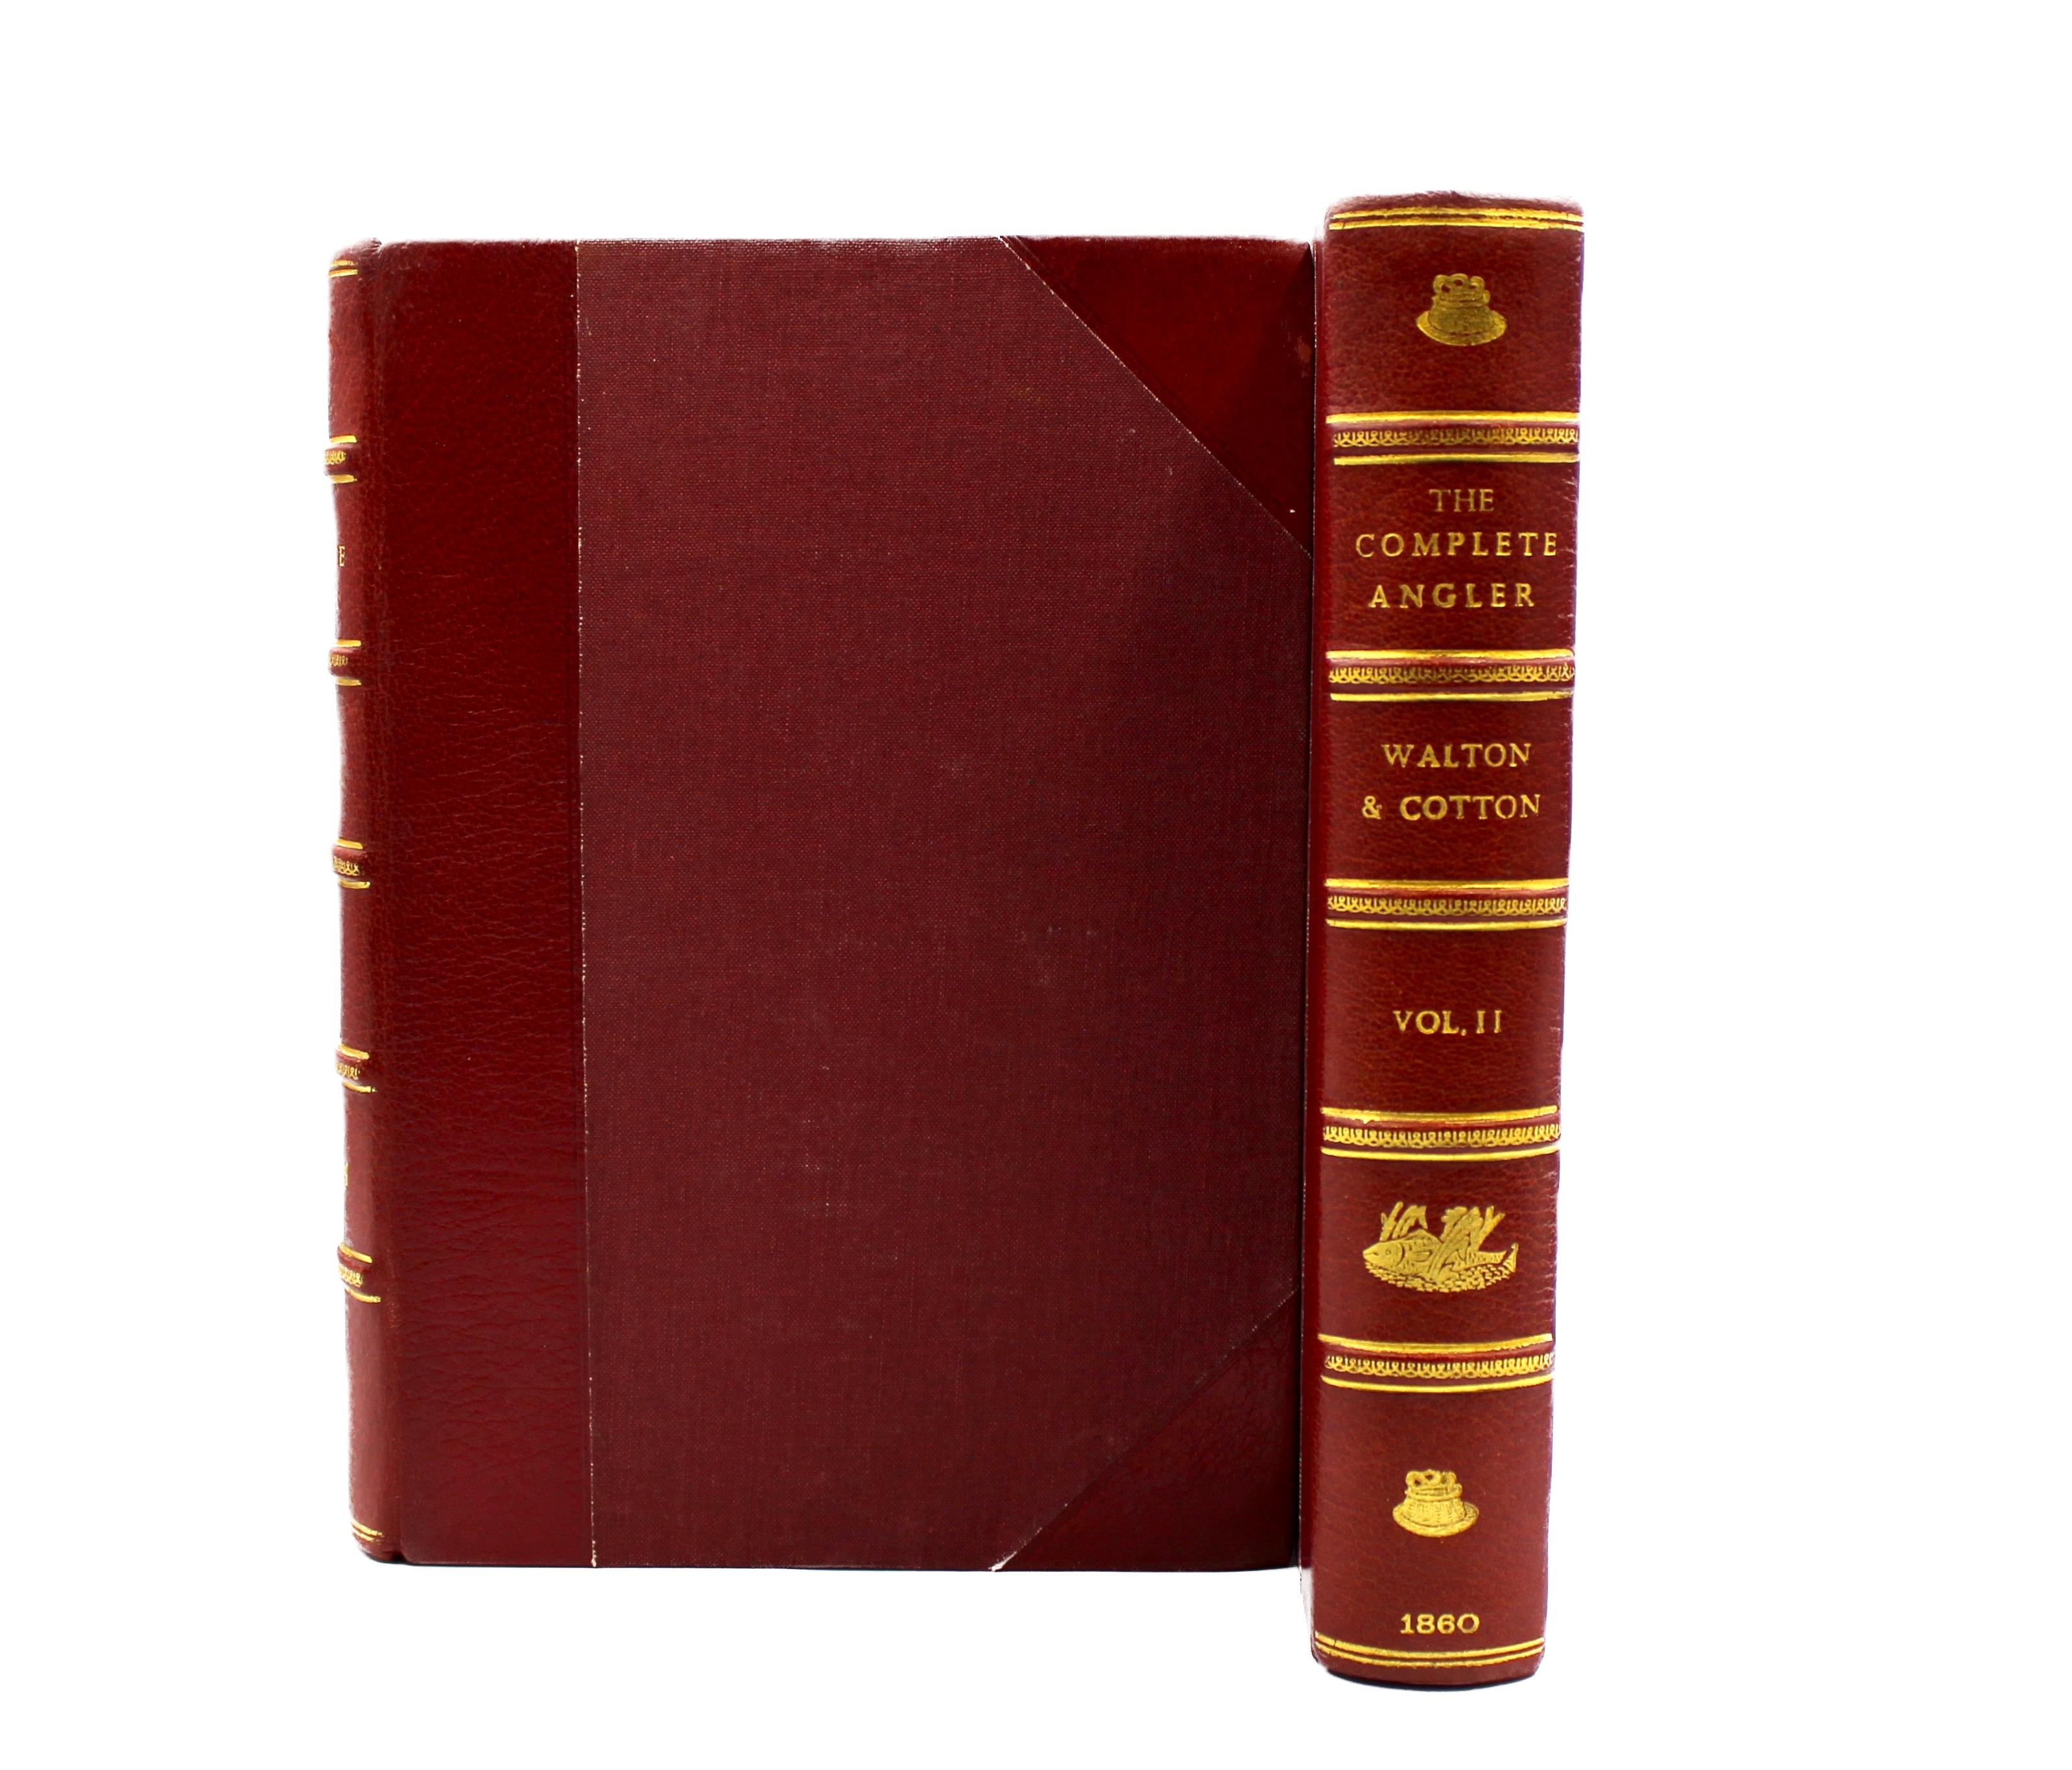 Walton, Izaak, with Charles Cotton. The Complete Angler or the Contemplative Man’s Recreation… Edited by Sir Harris Nicolas. London: Nattali and Bond, 1860. Second Nicolas Edition. 2 volumes, royal 8vo. Presented in modern half red Moroccan leather